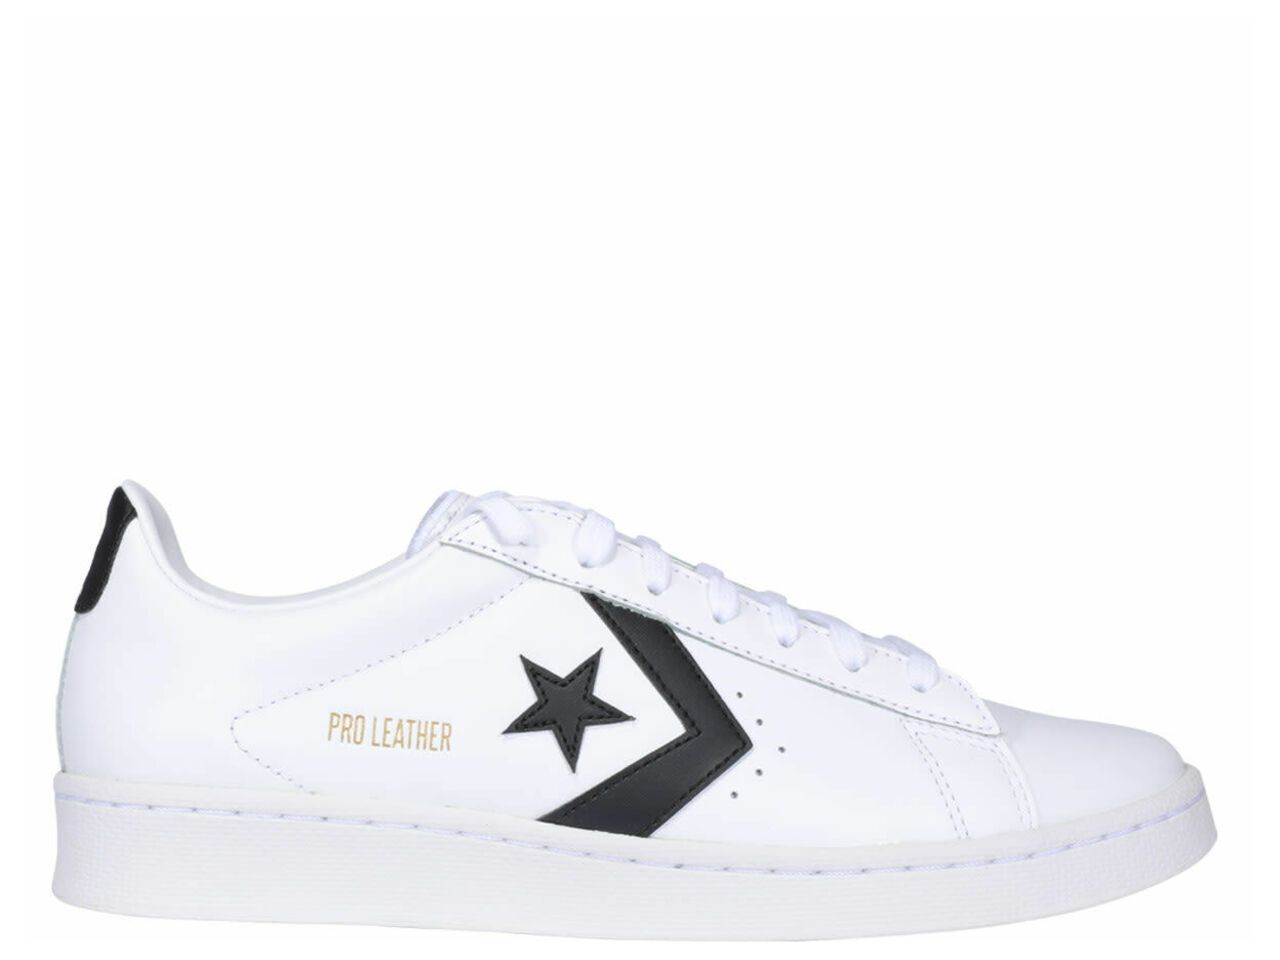 Converse Pro Leather Sneakers